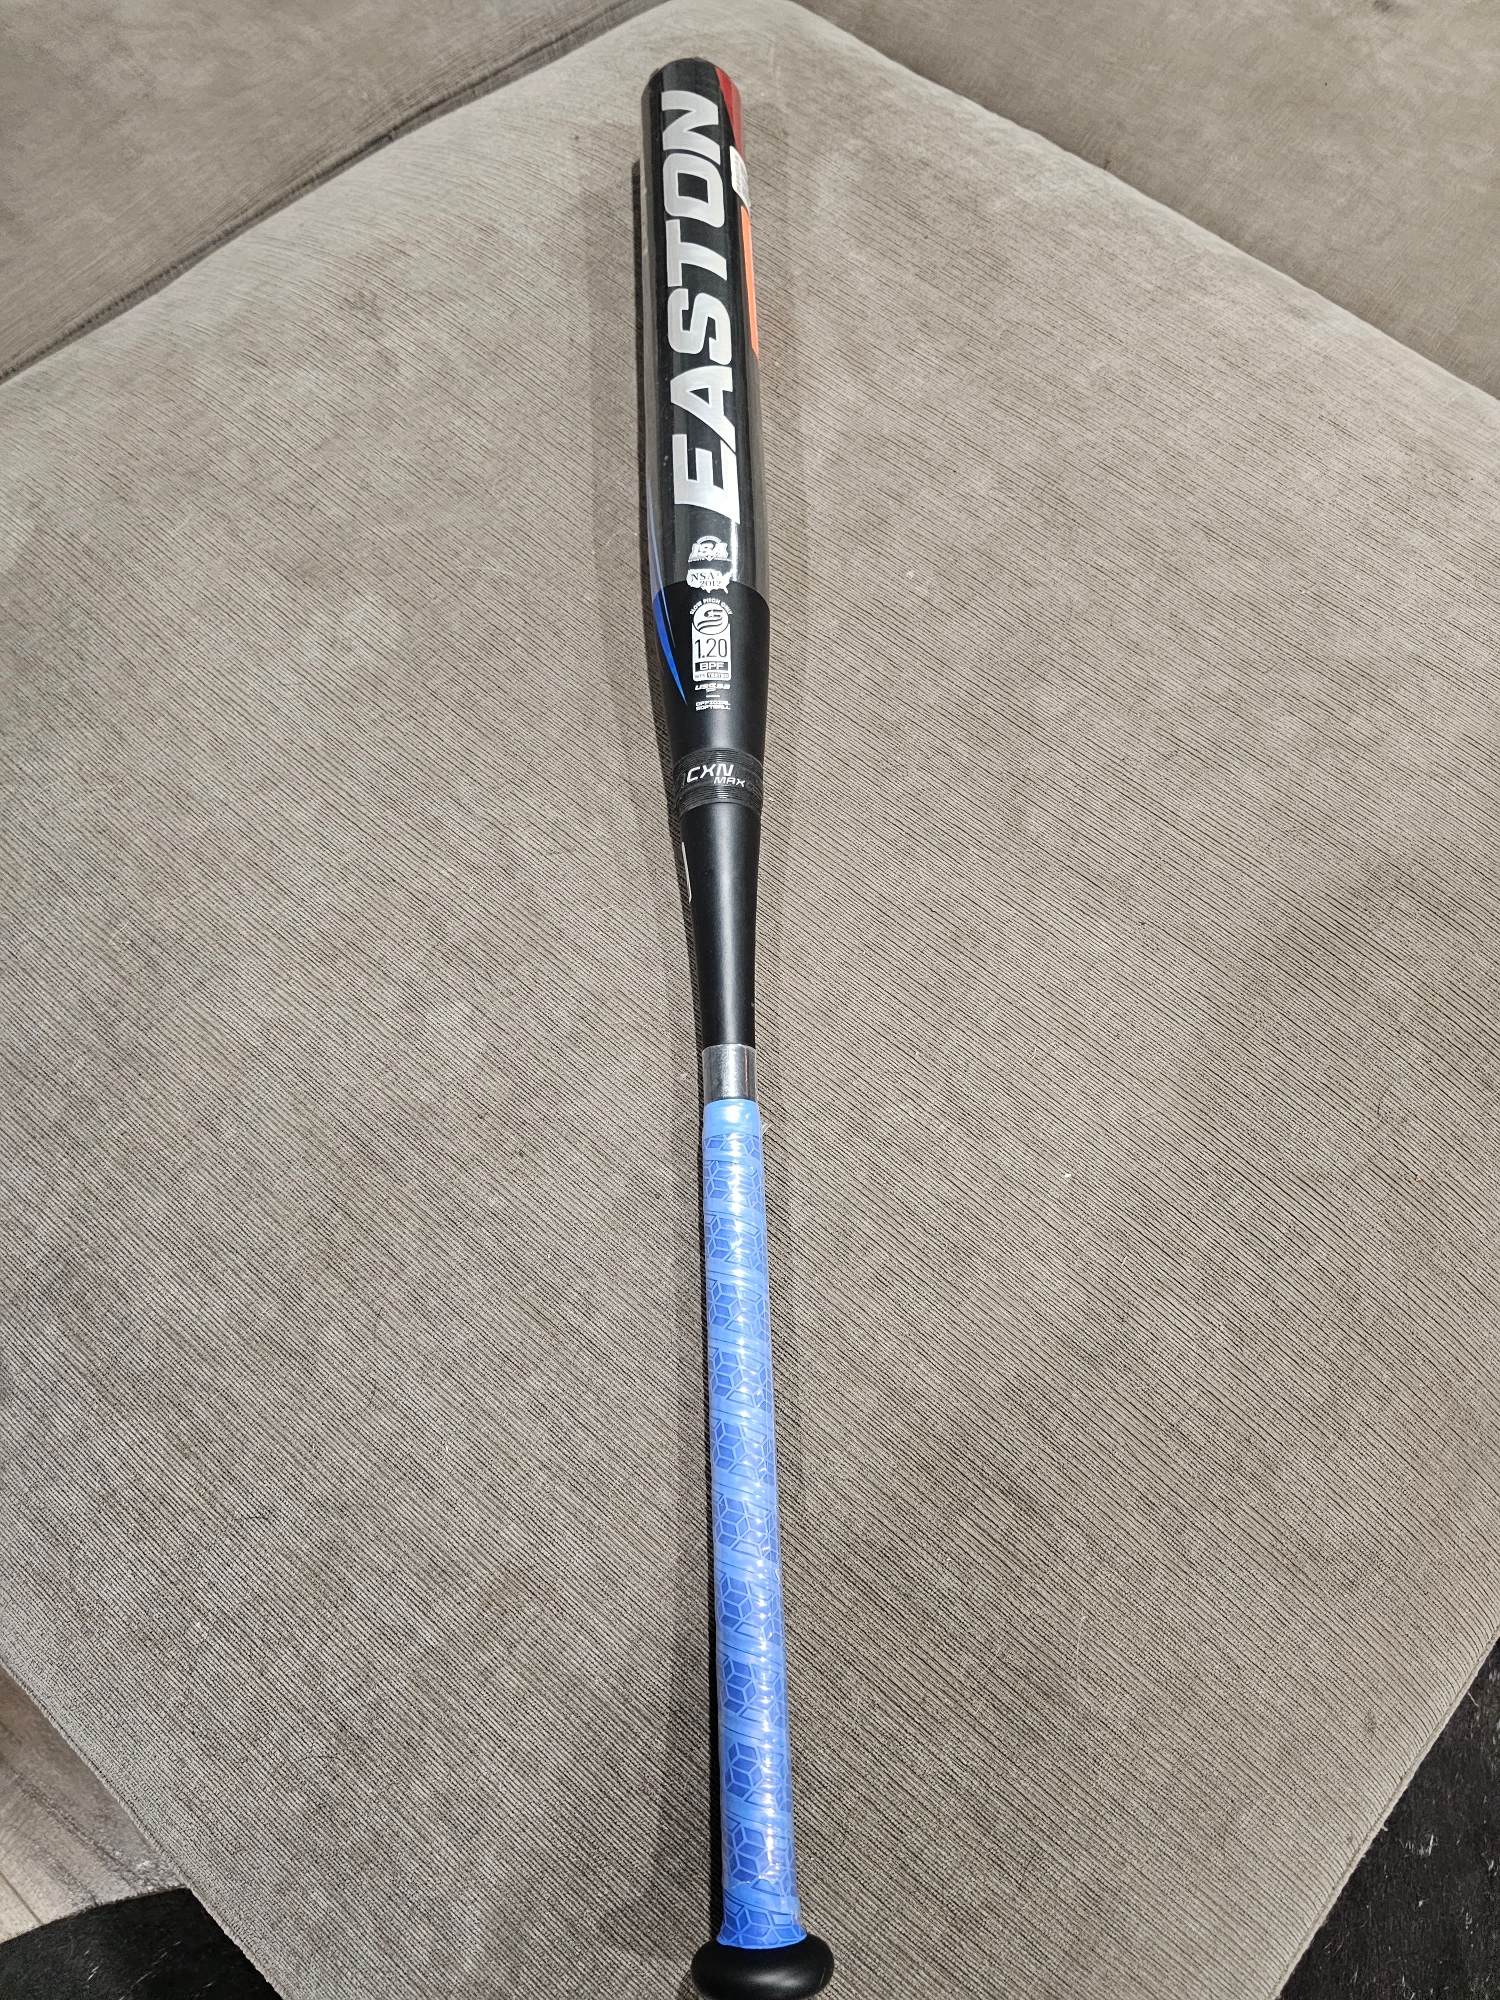 New 2022 Easton Composite Fire and Ice Bat (-8) 26 oz 34"